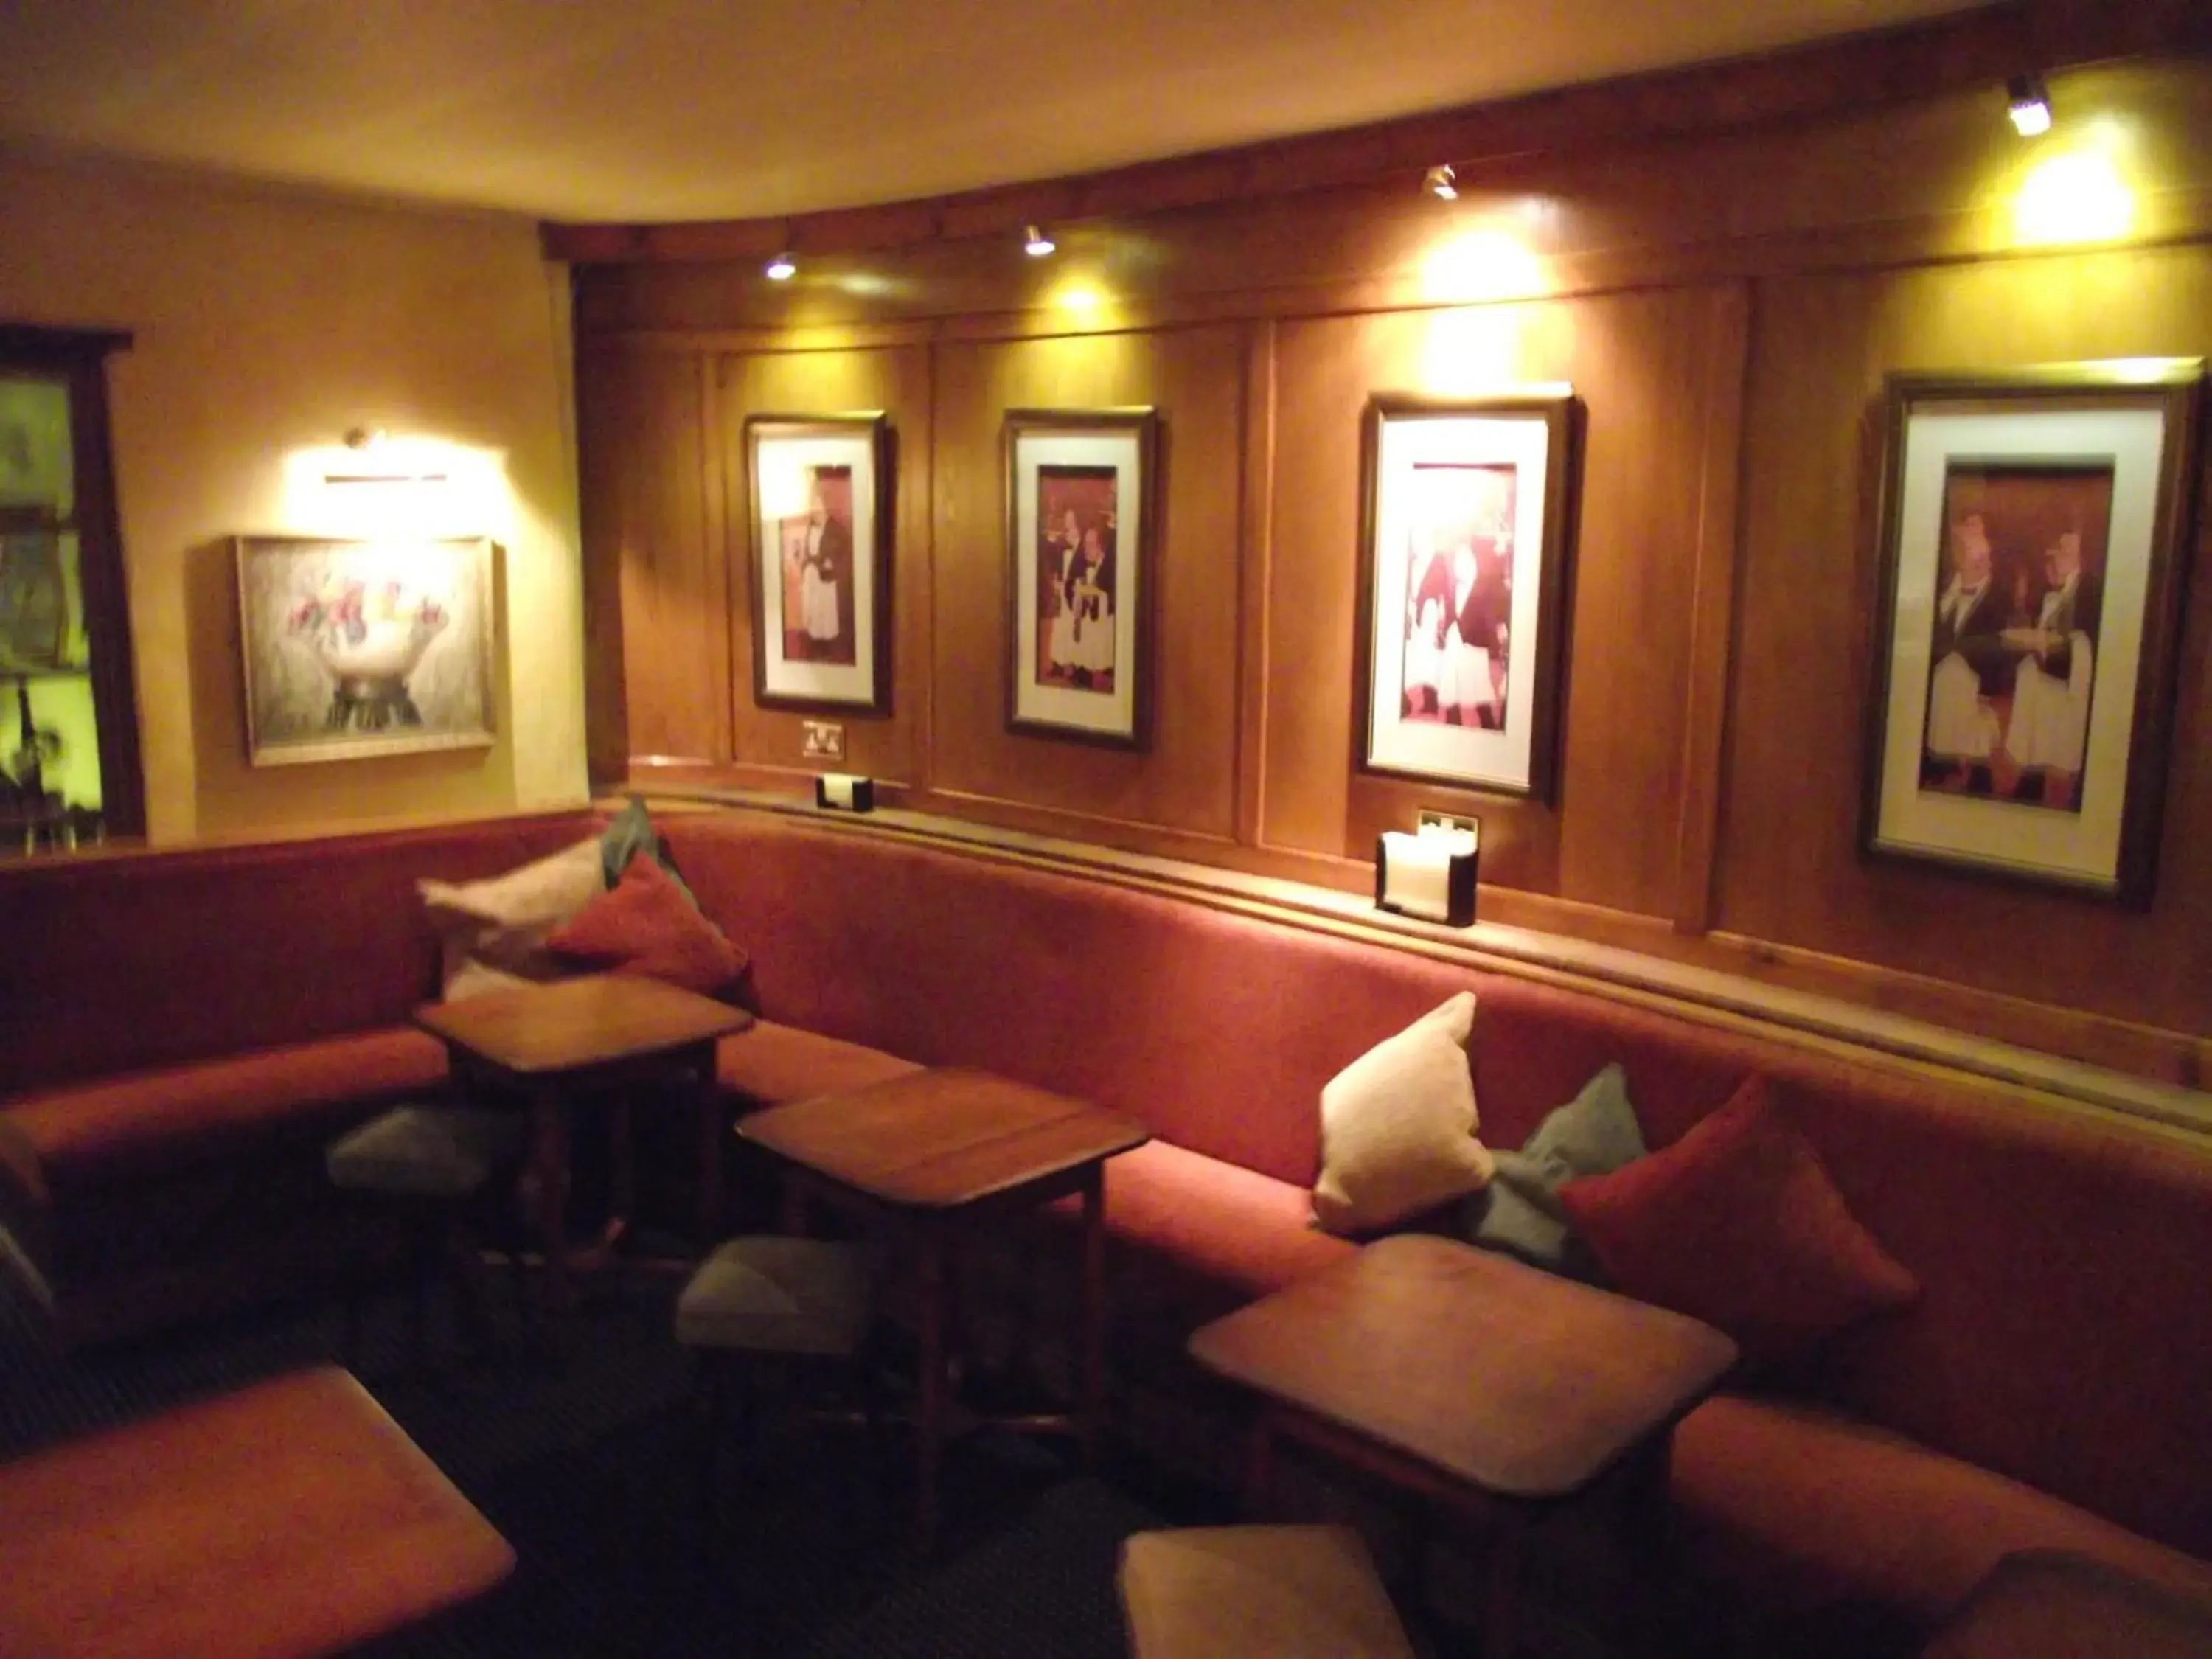 Decorative detail, Lounge/Bar in The Rugby Hotel